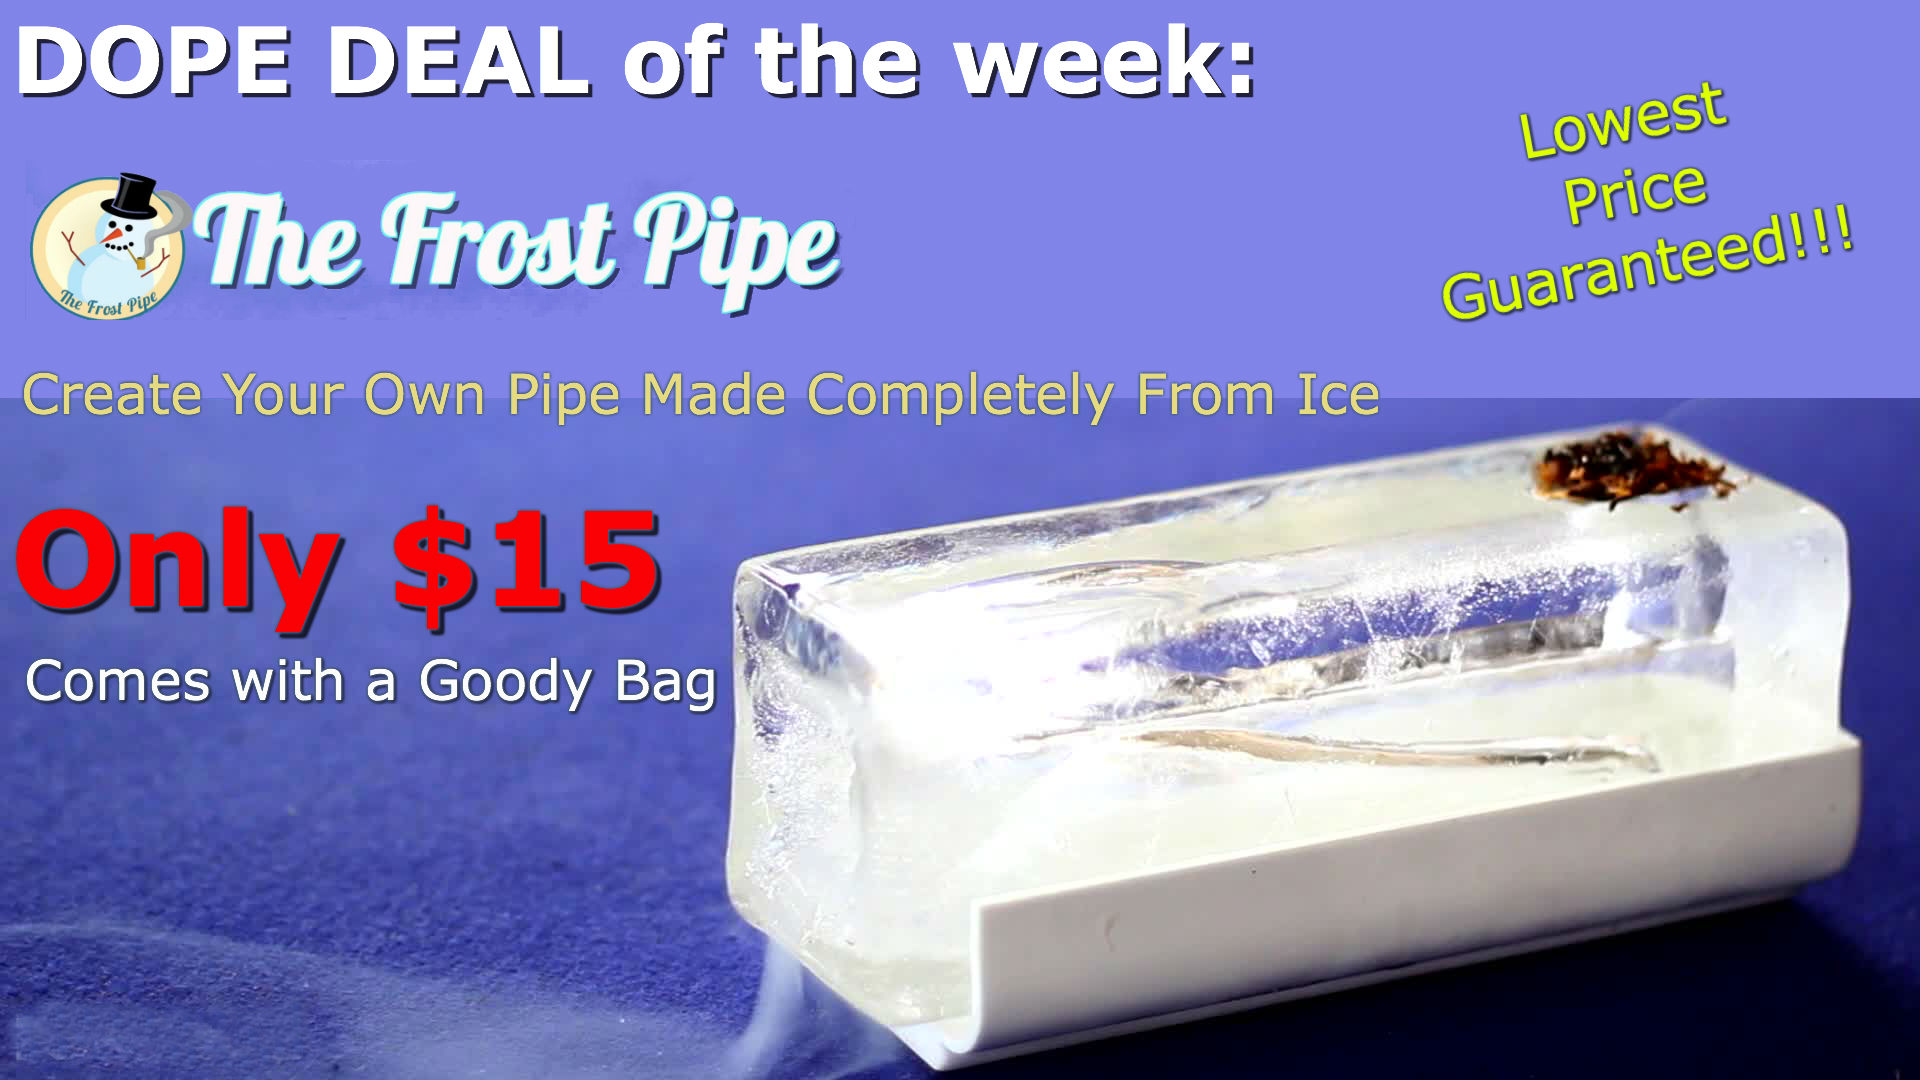 Frost Pipe Promo 2